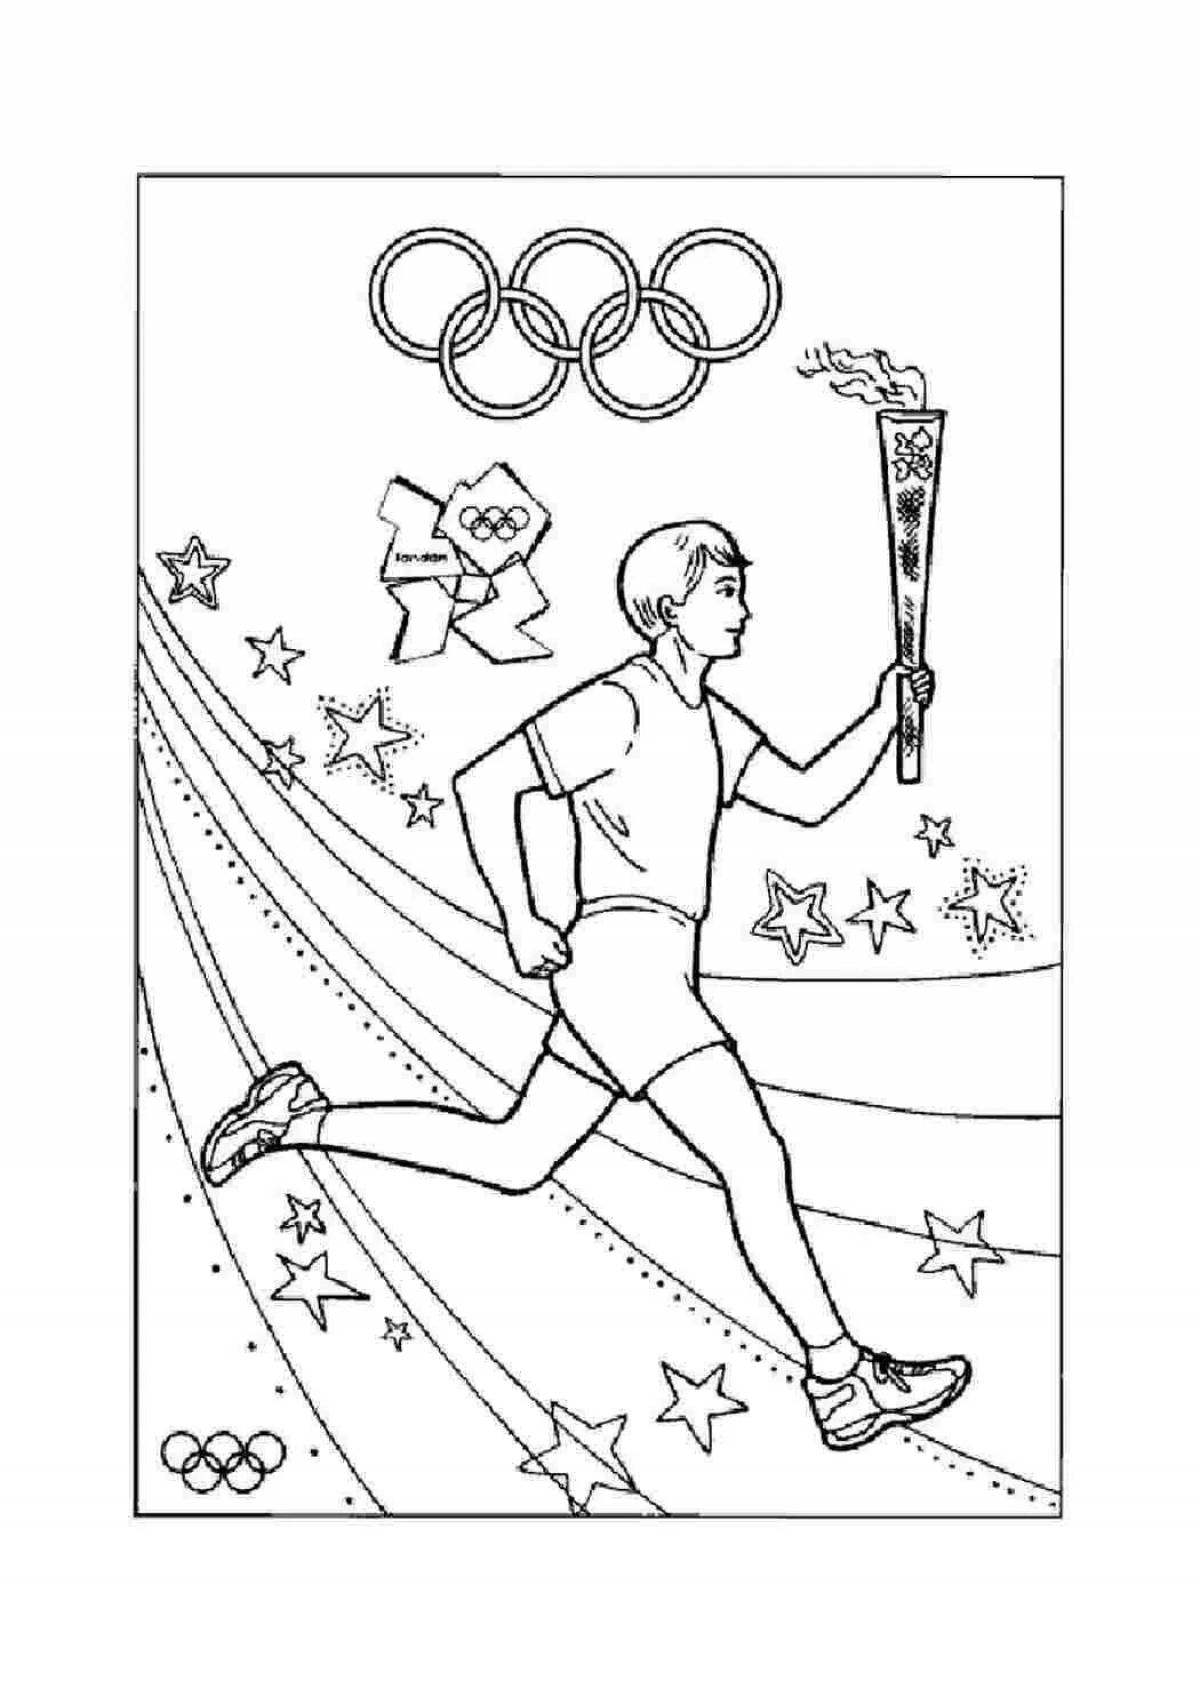 Stimulating sports coloring pages for kids